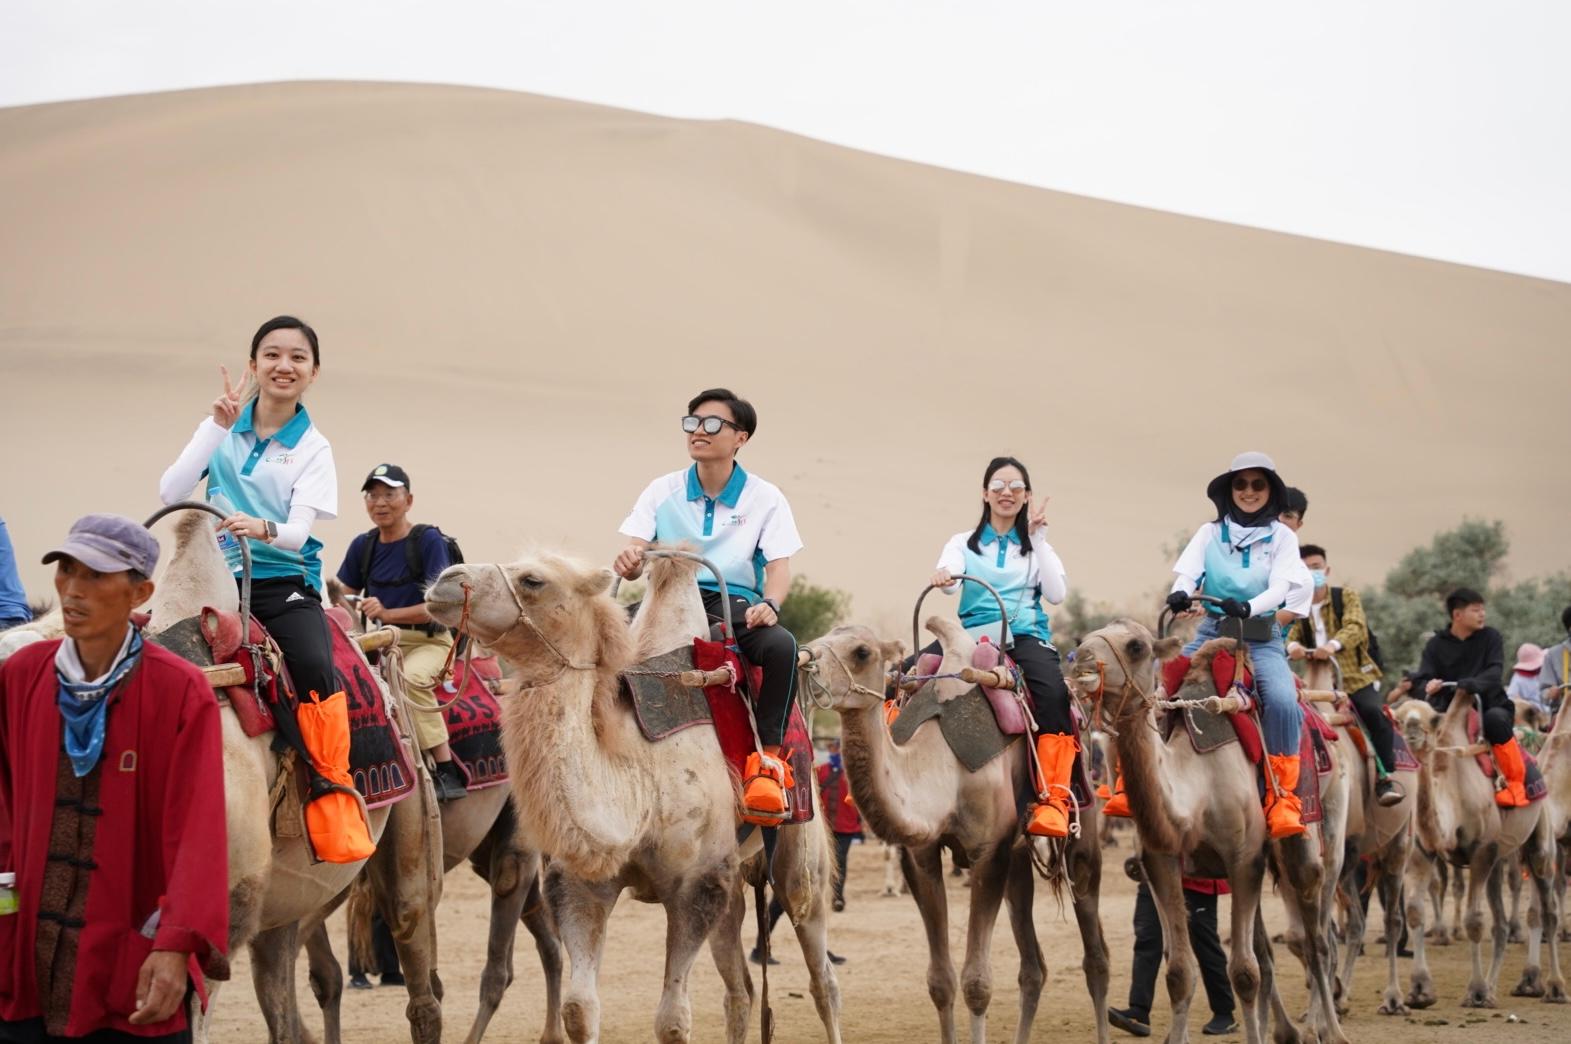 Members of “Customs YES” rode camels to the Mount Mingshashan and Crescent Moon-shaped Spring to appreciate the national desert landscape on July 11.